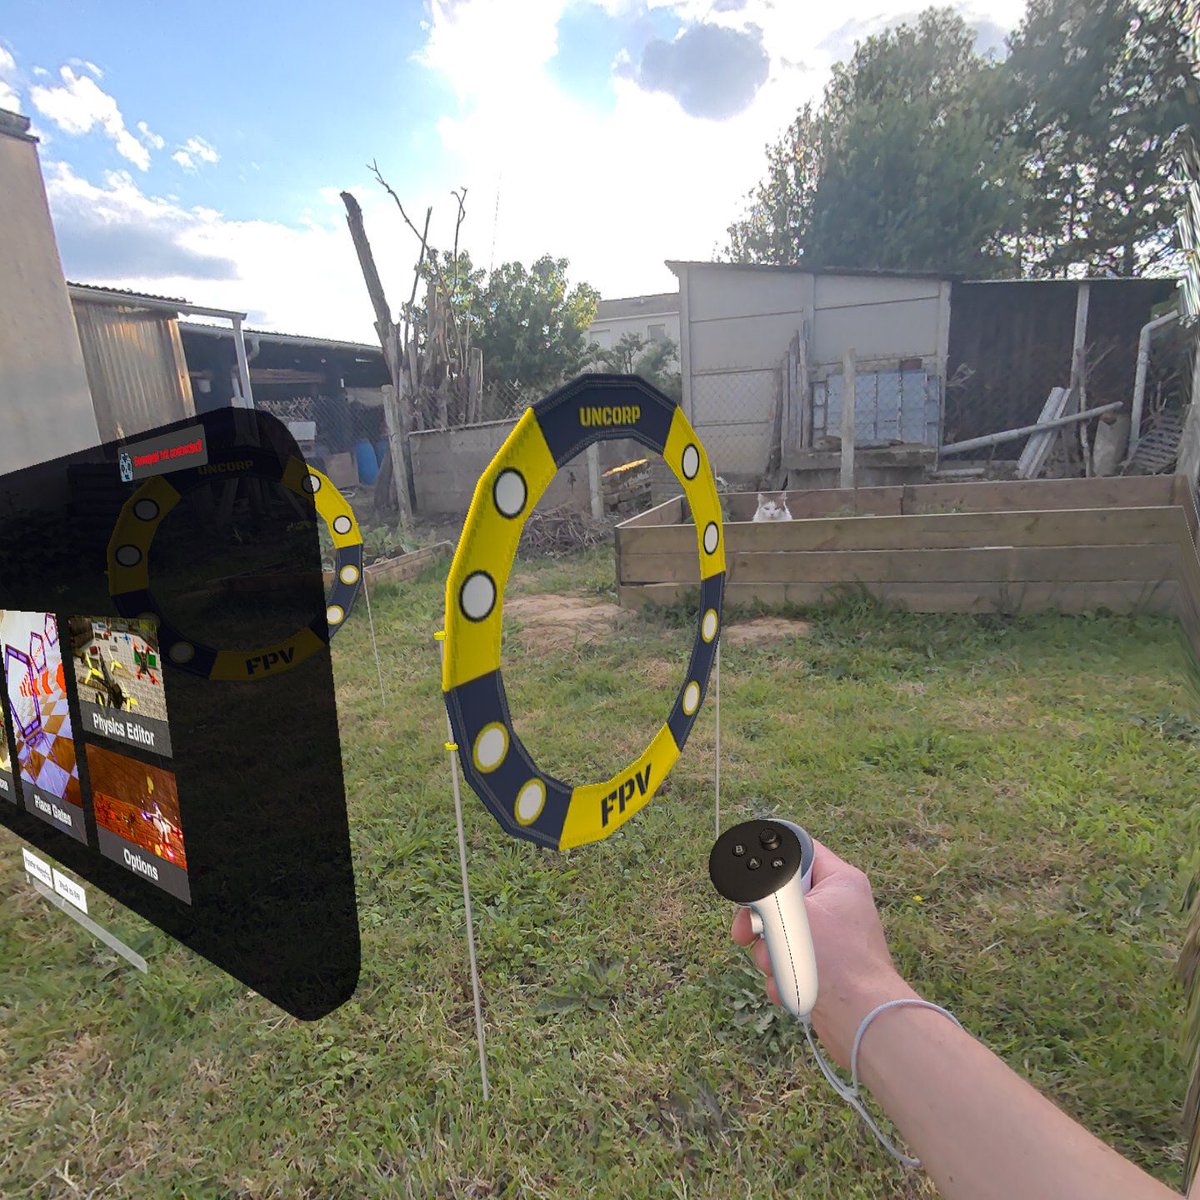 This is DVR Simulator in Mixed Reality on @MetaQuestVR 3. Note that the @Apple Vision Pro is also coming with the same features. #MixedReality #Drone #Simulator